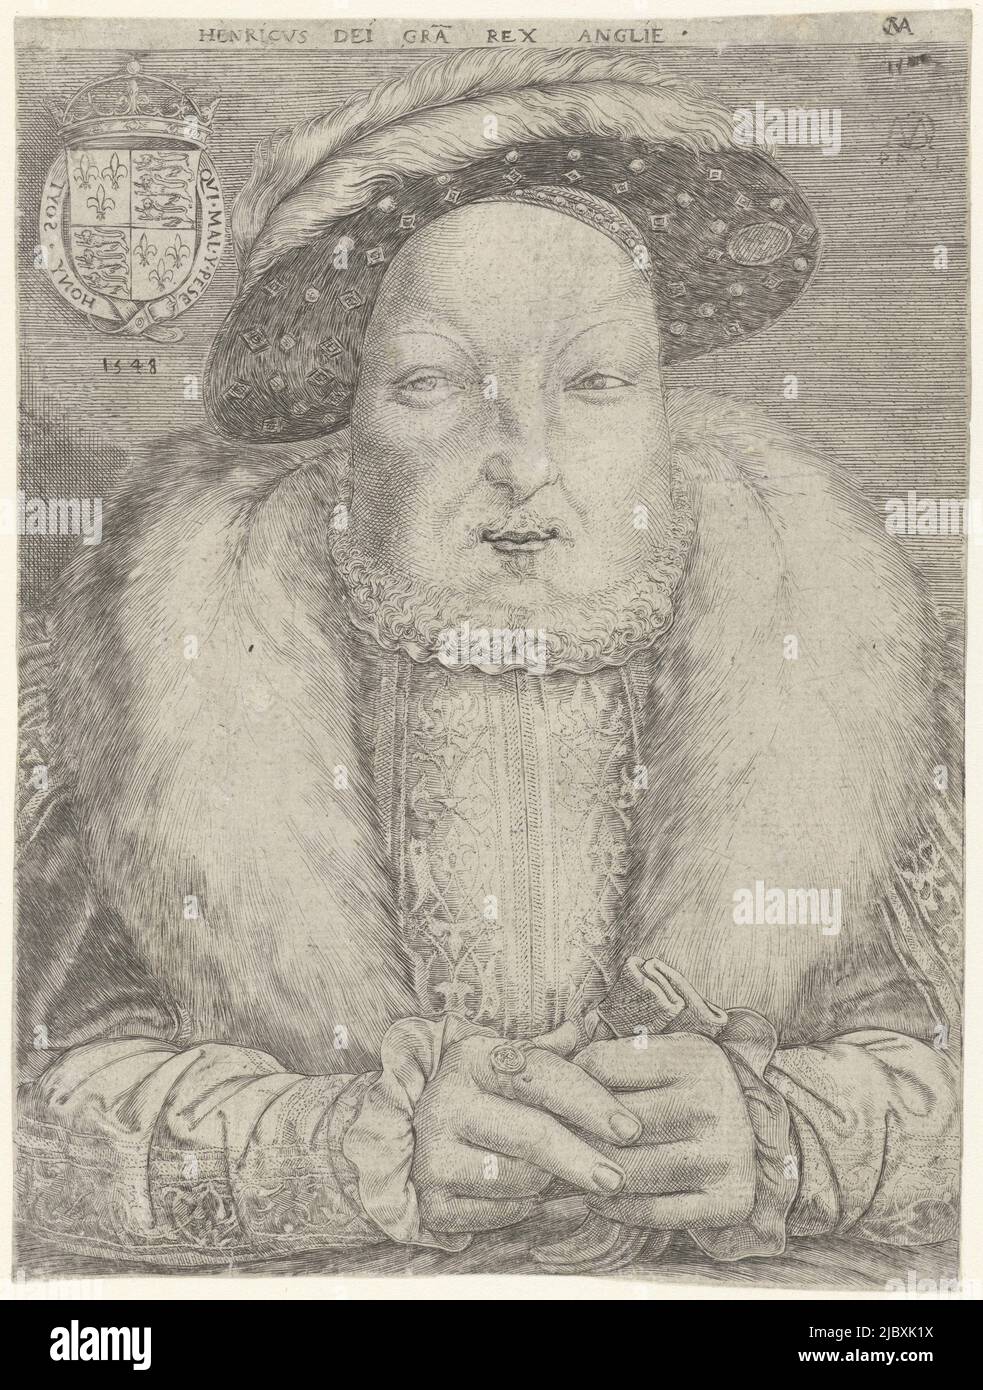 Portrait of Henry VIII, King of England and Ireland, holding a pair of gloves. Top left his coat of arms., Portrait of King Henry VIII of England and Ireland Henricus dei gra rex anglie , print maker: Cornelis Massijs, (mentioned on object), Antwerp, 1548, paper, engraving, h 179 mm × w 134 mm Stock Photo